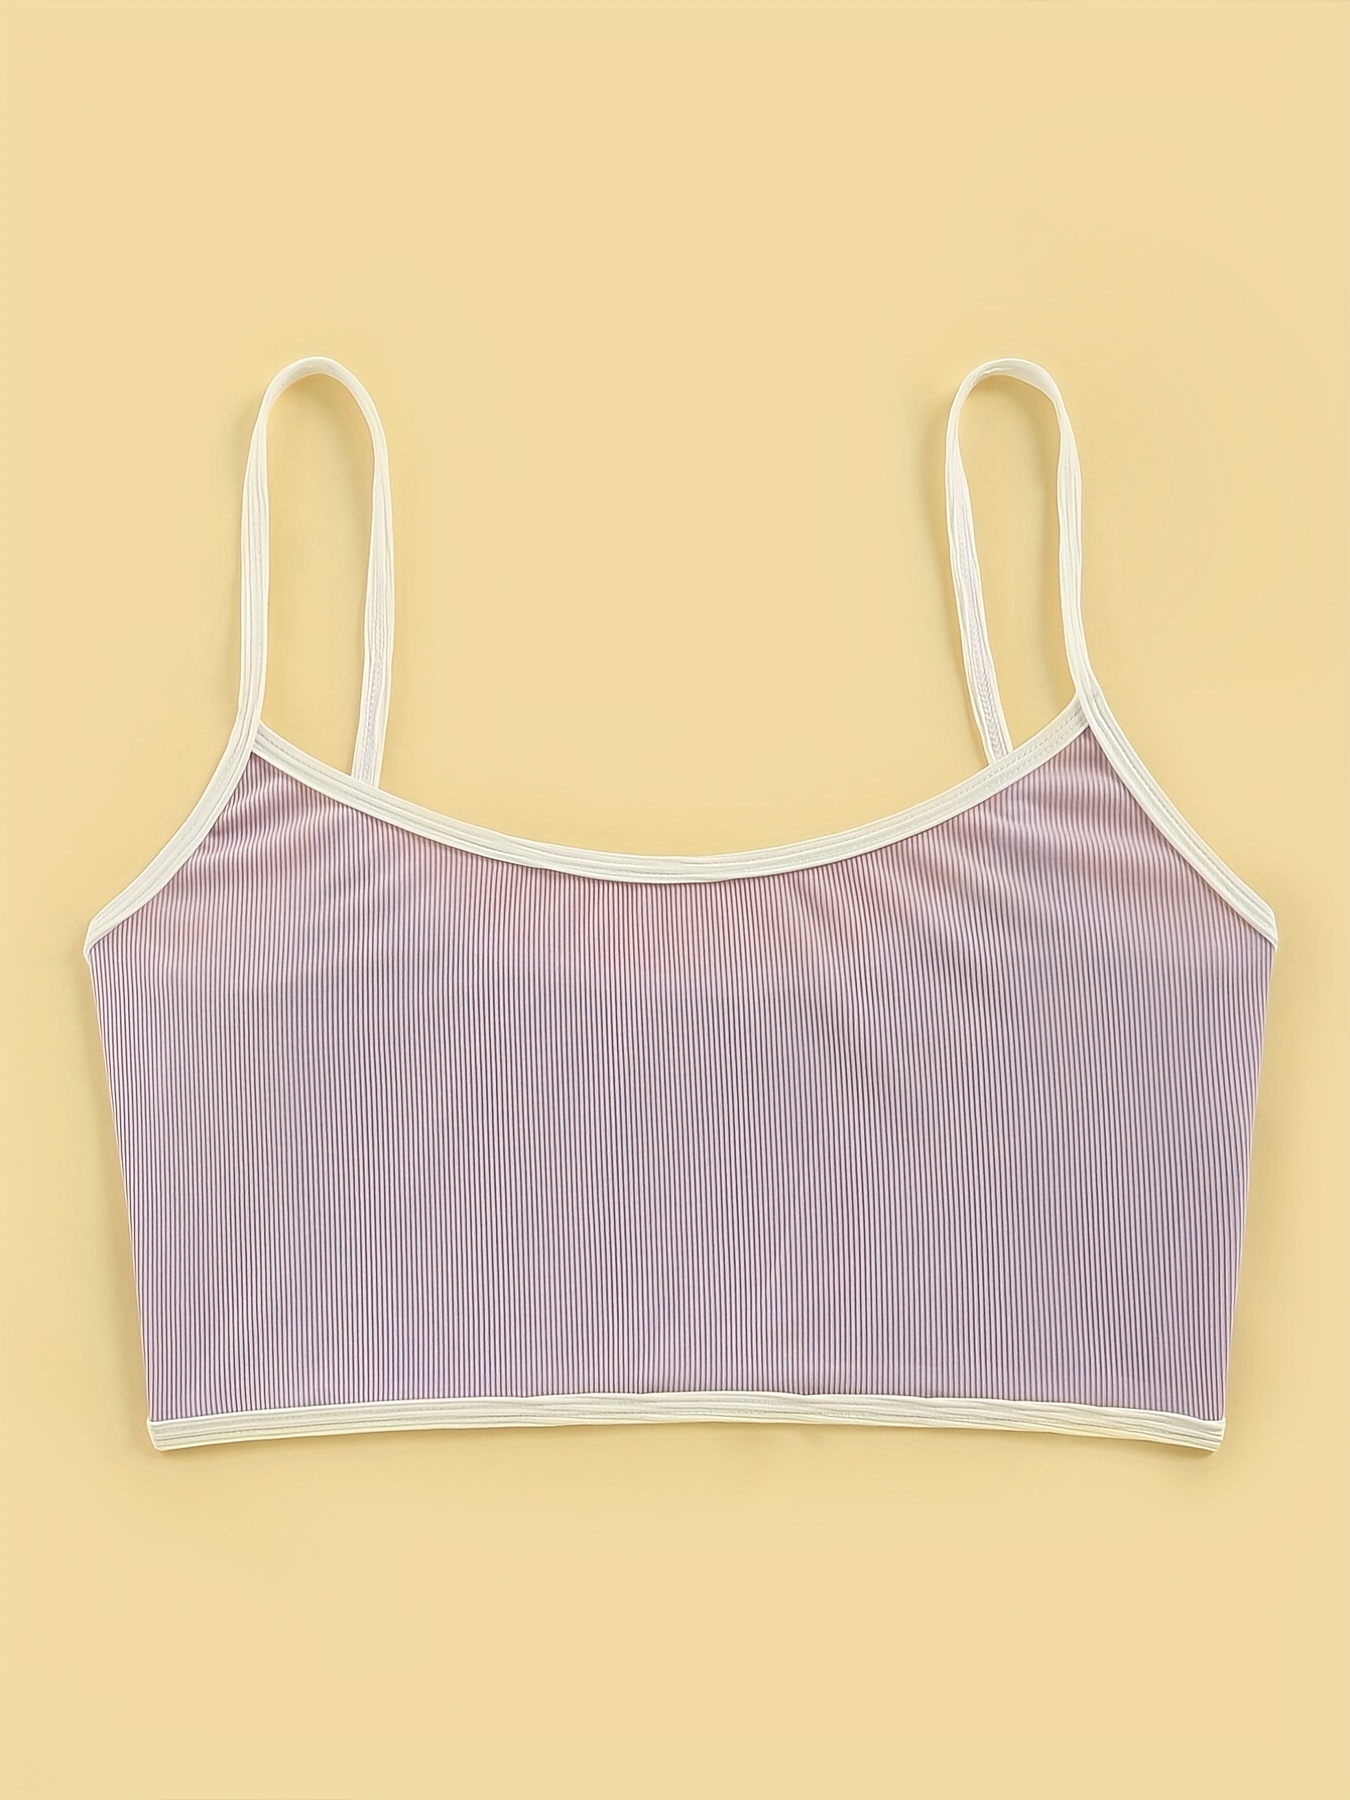 Colorblock Ribbed Camisole Top With Built In Bra And Sleeveless Design Sexy  Omighty Crop Top For Women L230619 From Liancheng01, $12.34